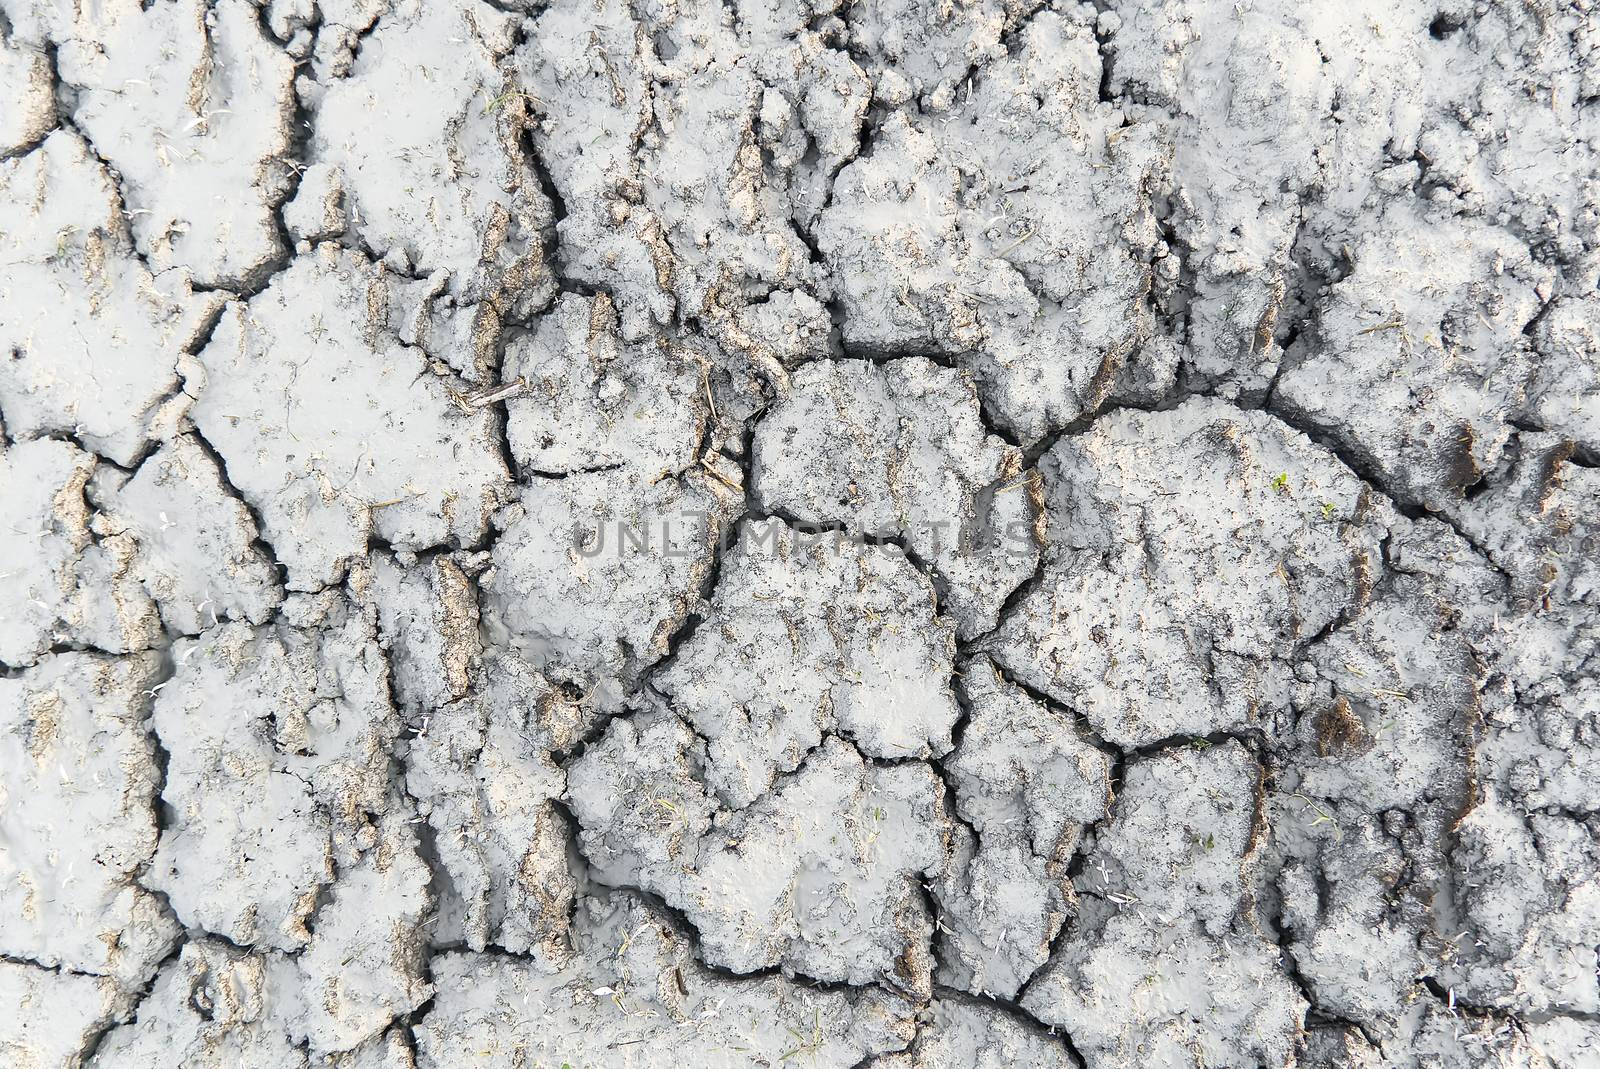 dry cracked earth texture. Dry cracked earth background, cracked earth texture. by PhotoTime